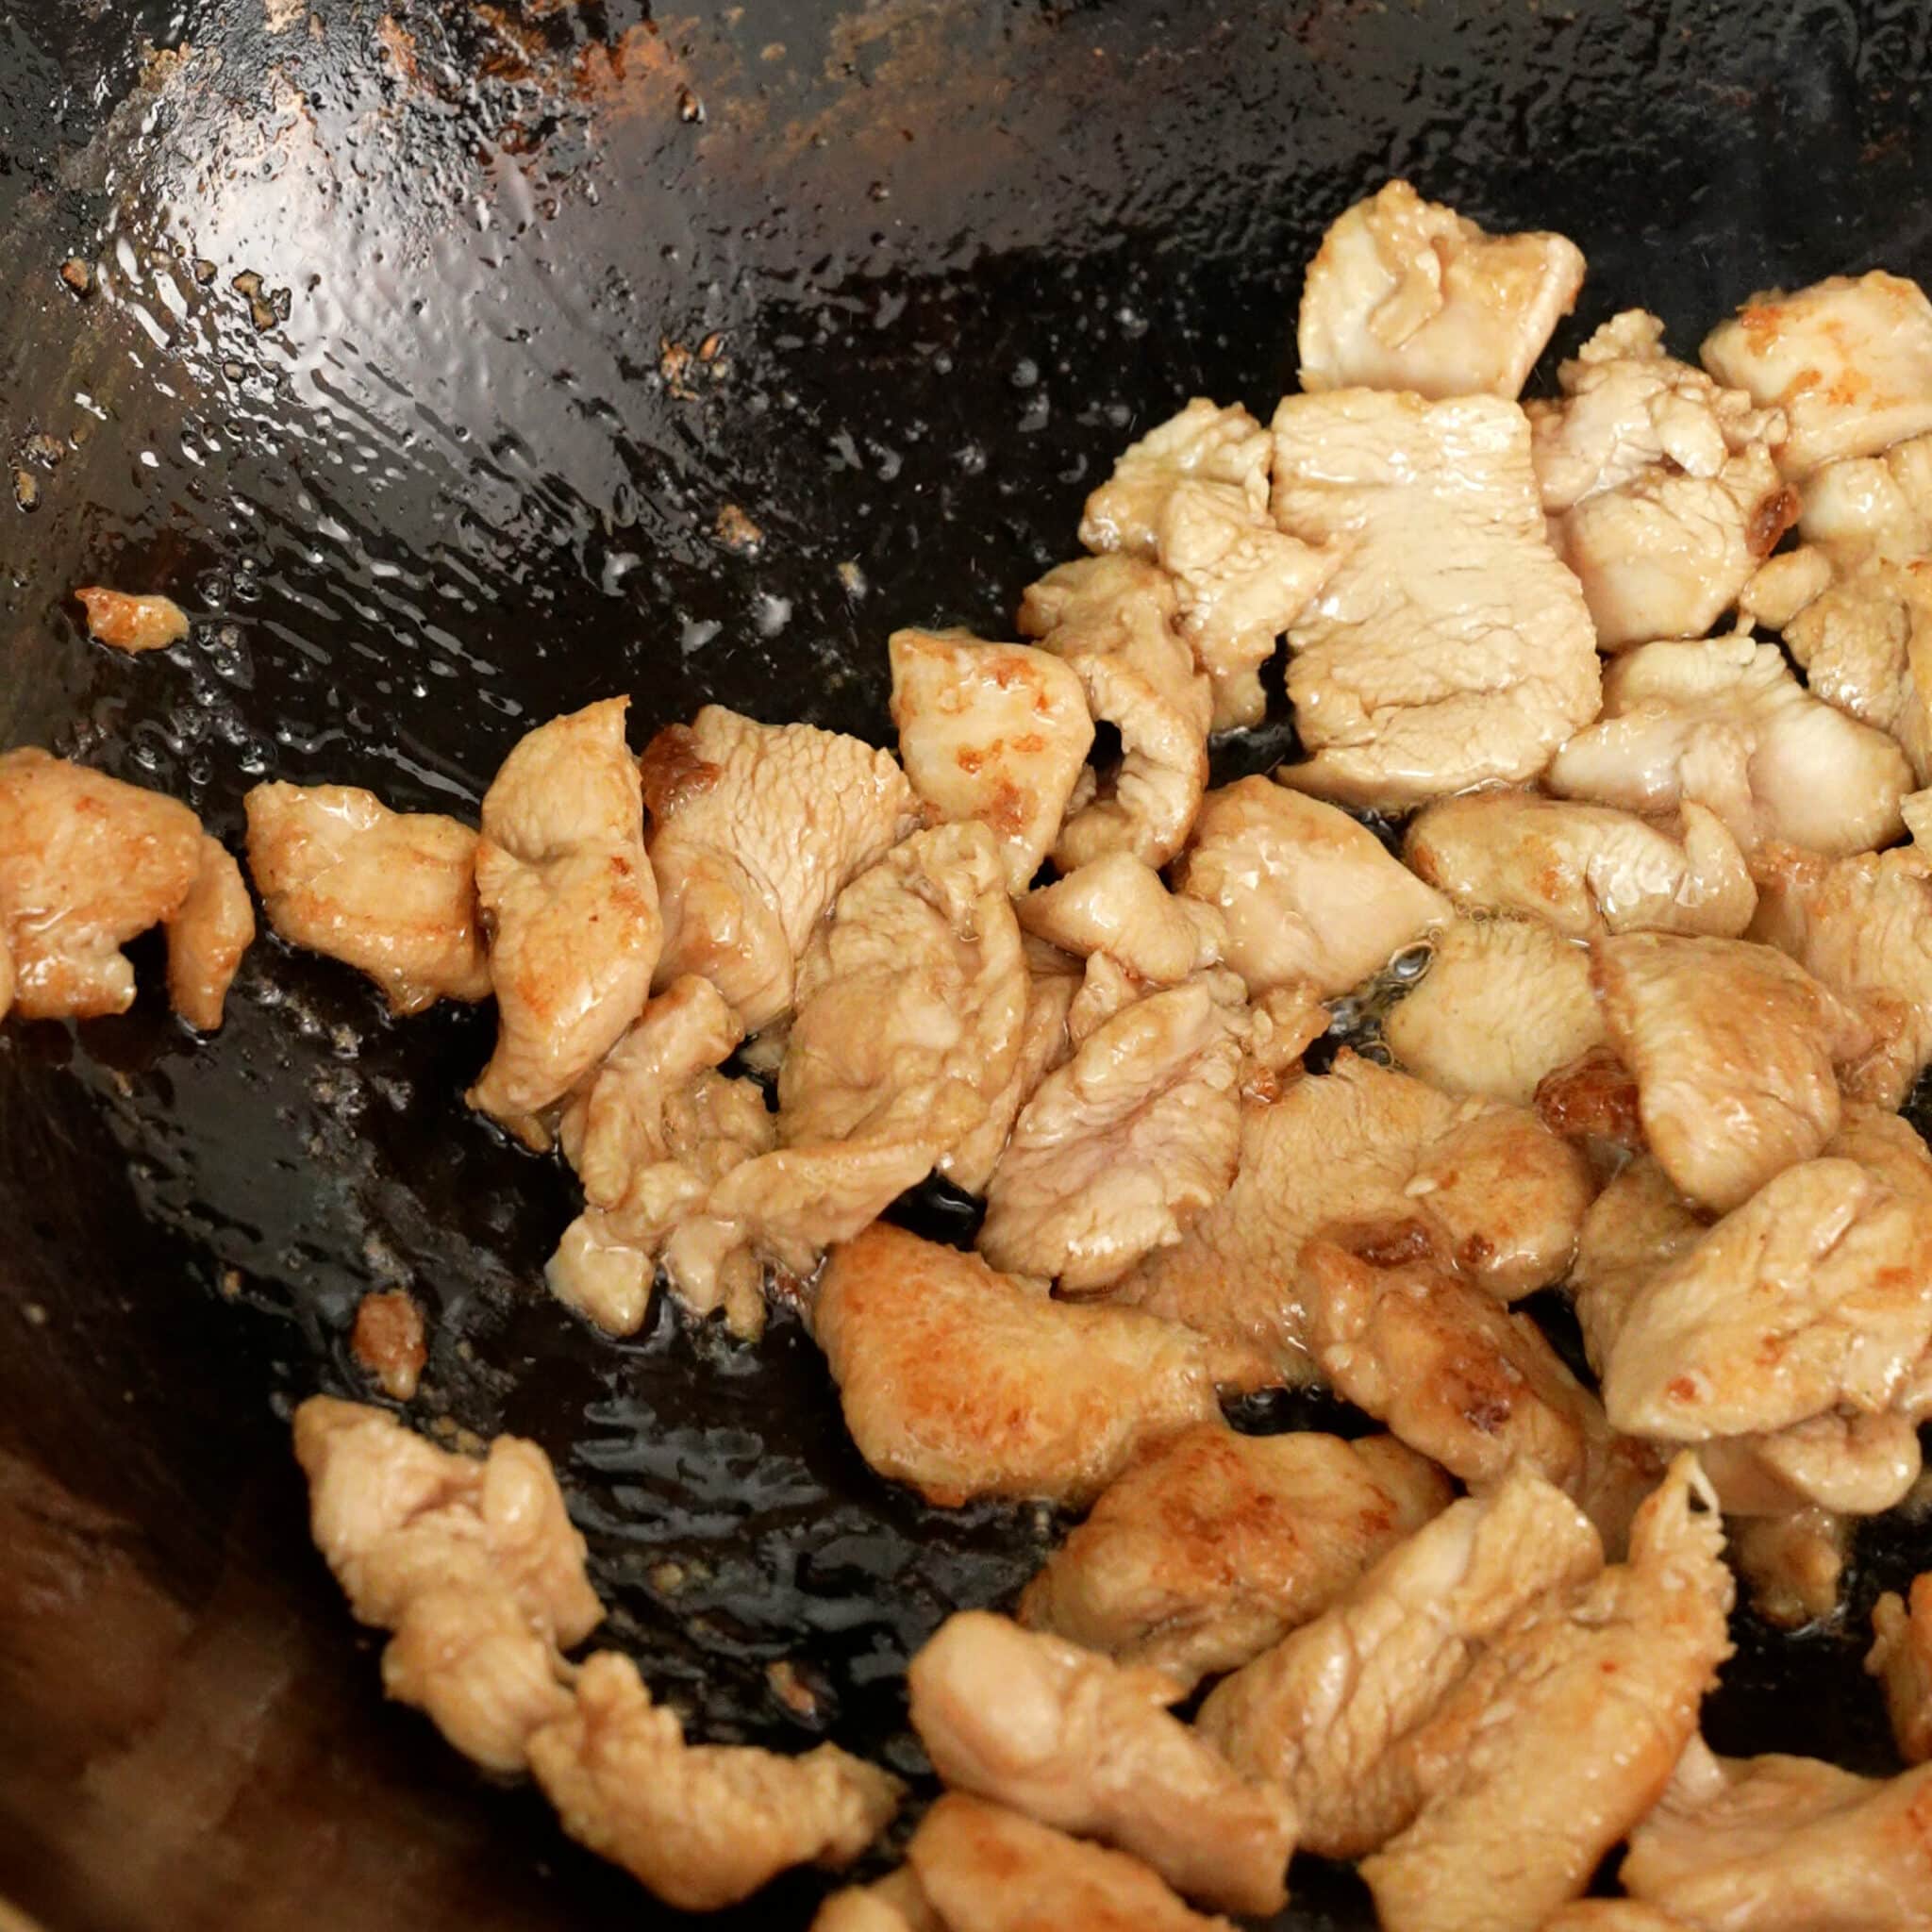 Cooked chicken in a wok.